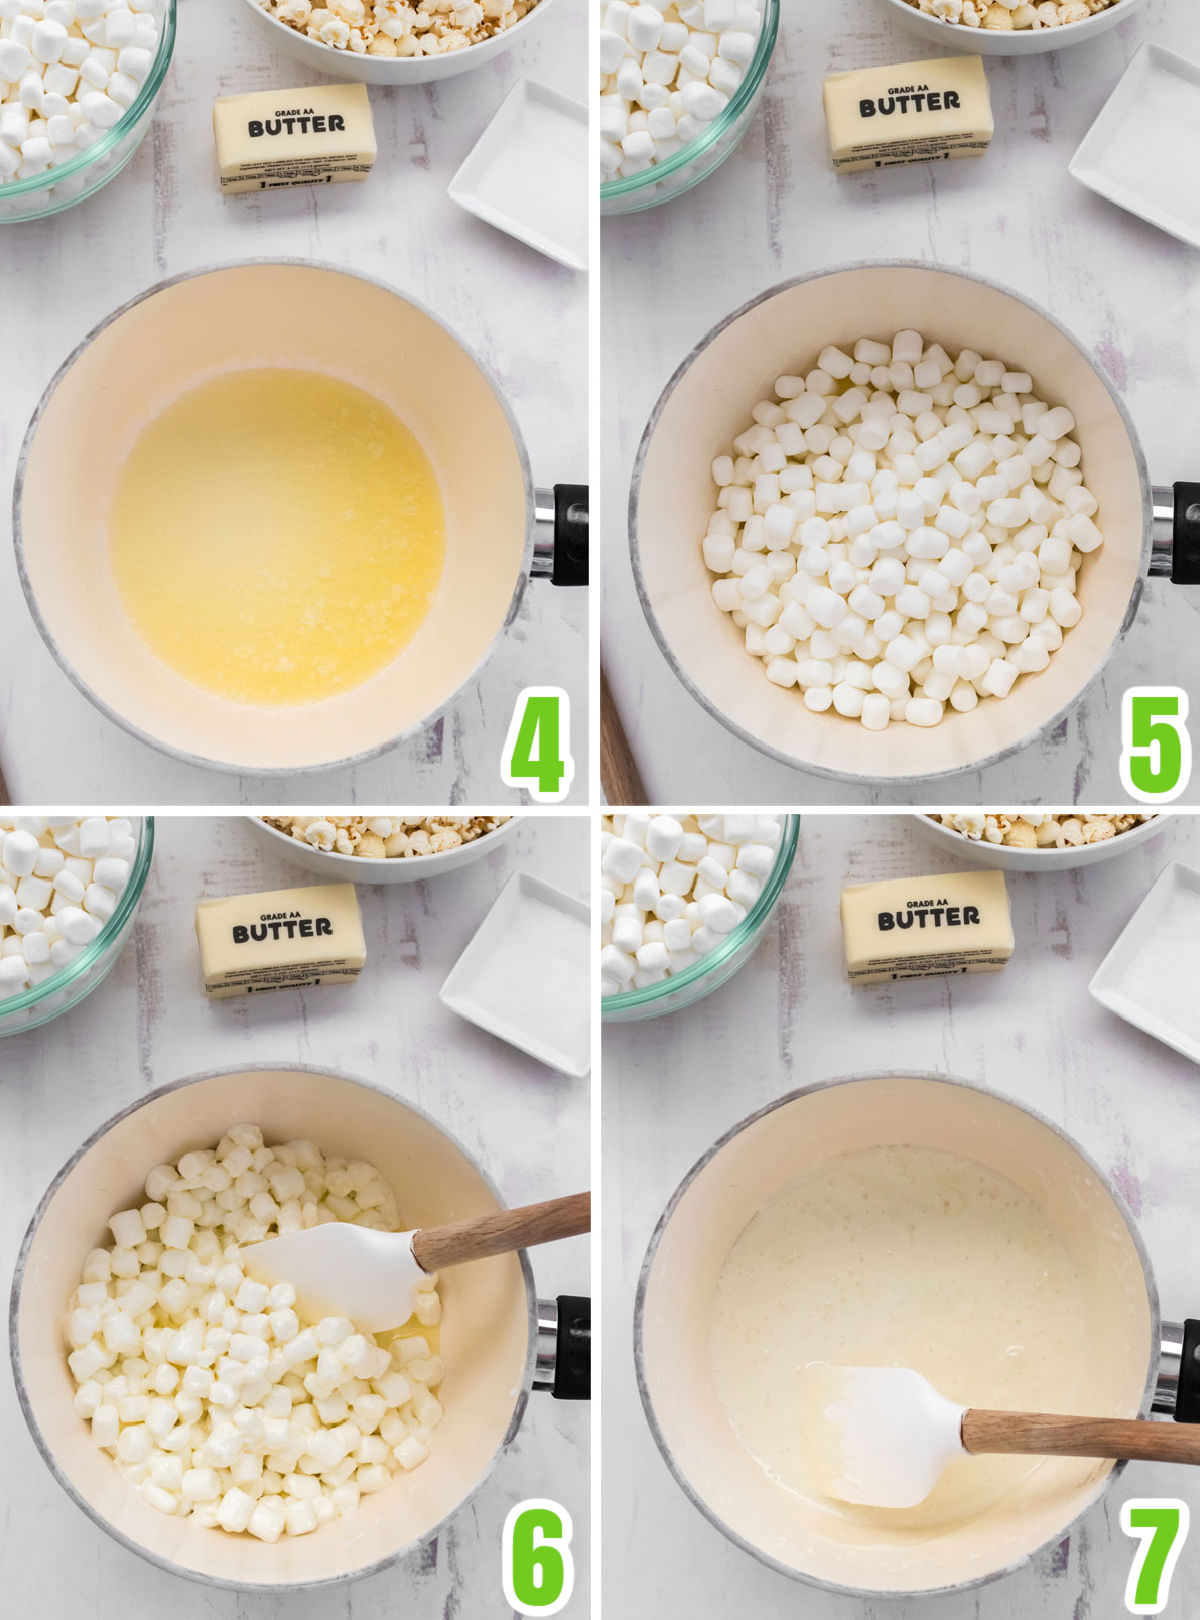 Collage image showing how to make the Marshmallow mixture for the Bewitched Halloween Popcorn.